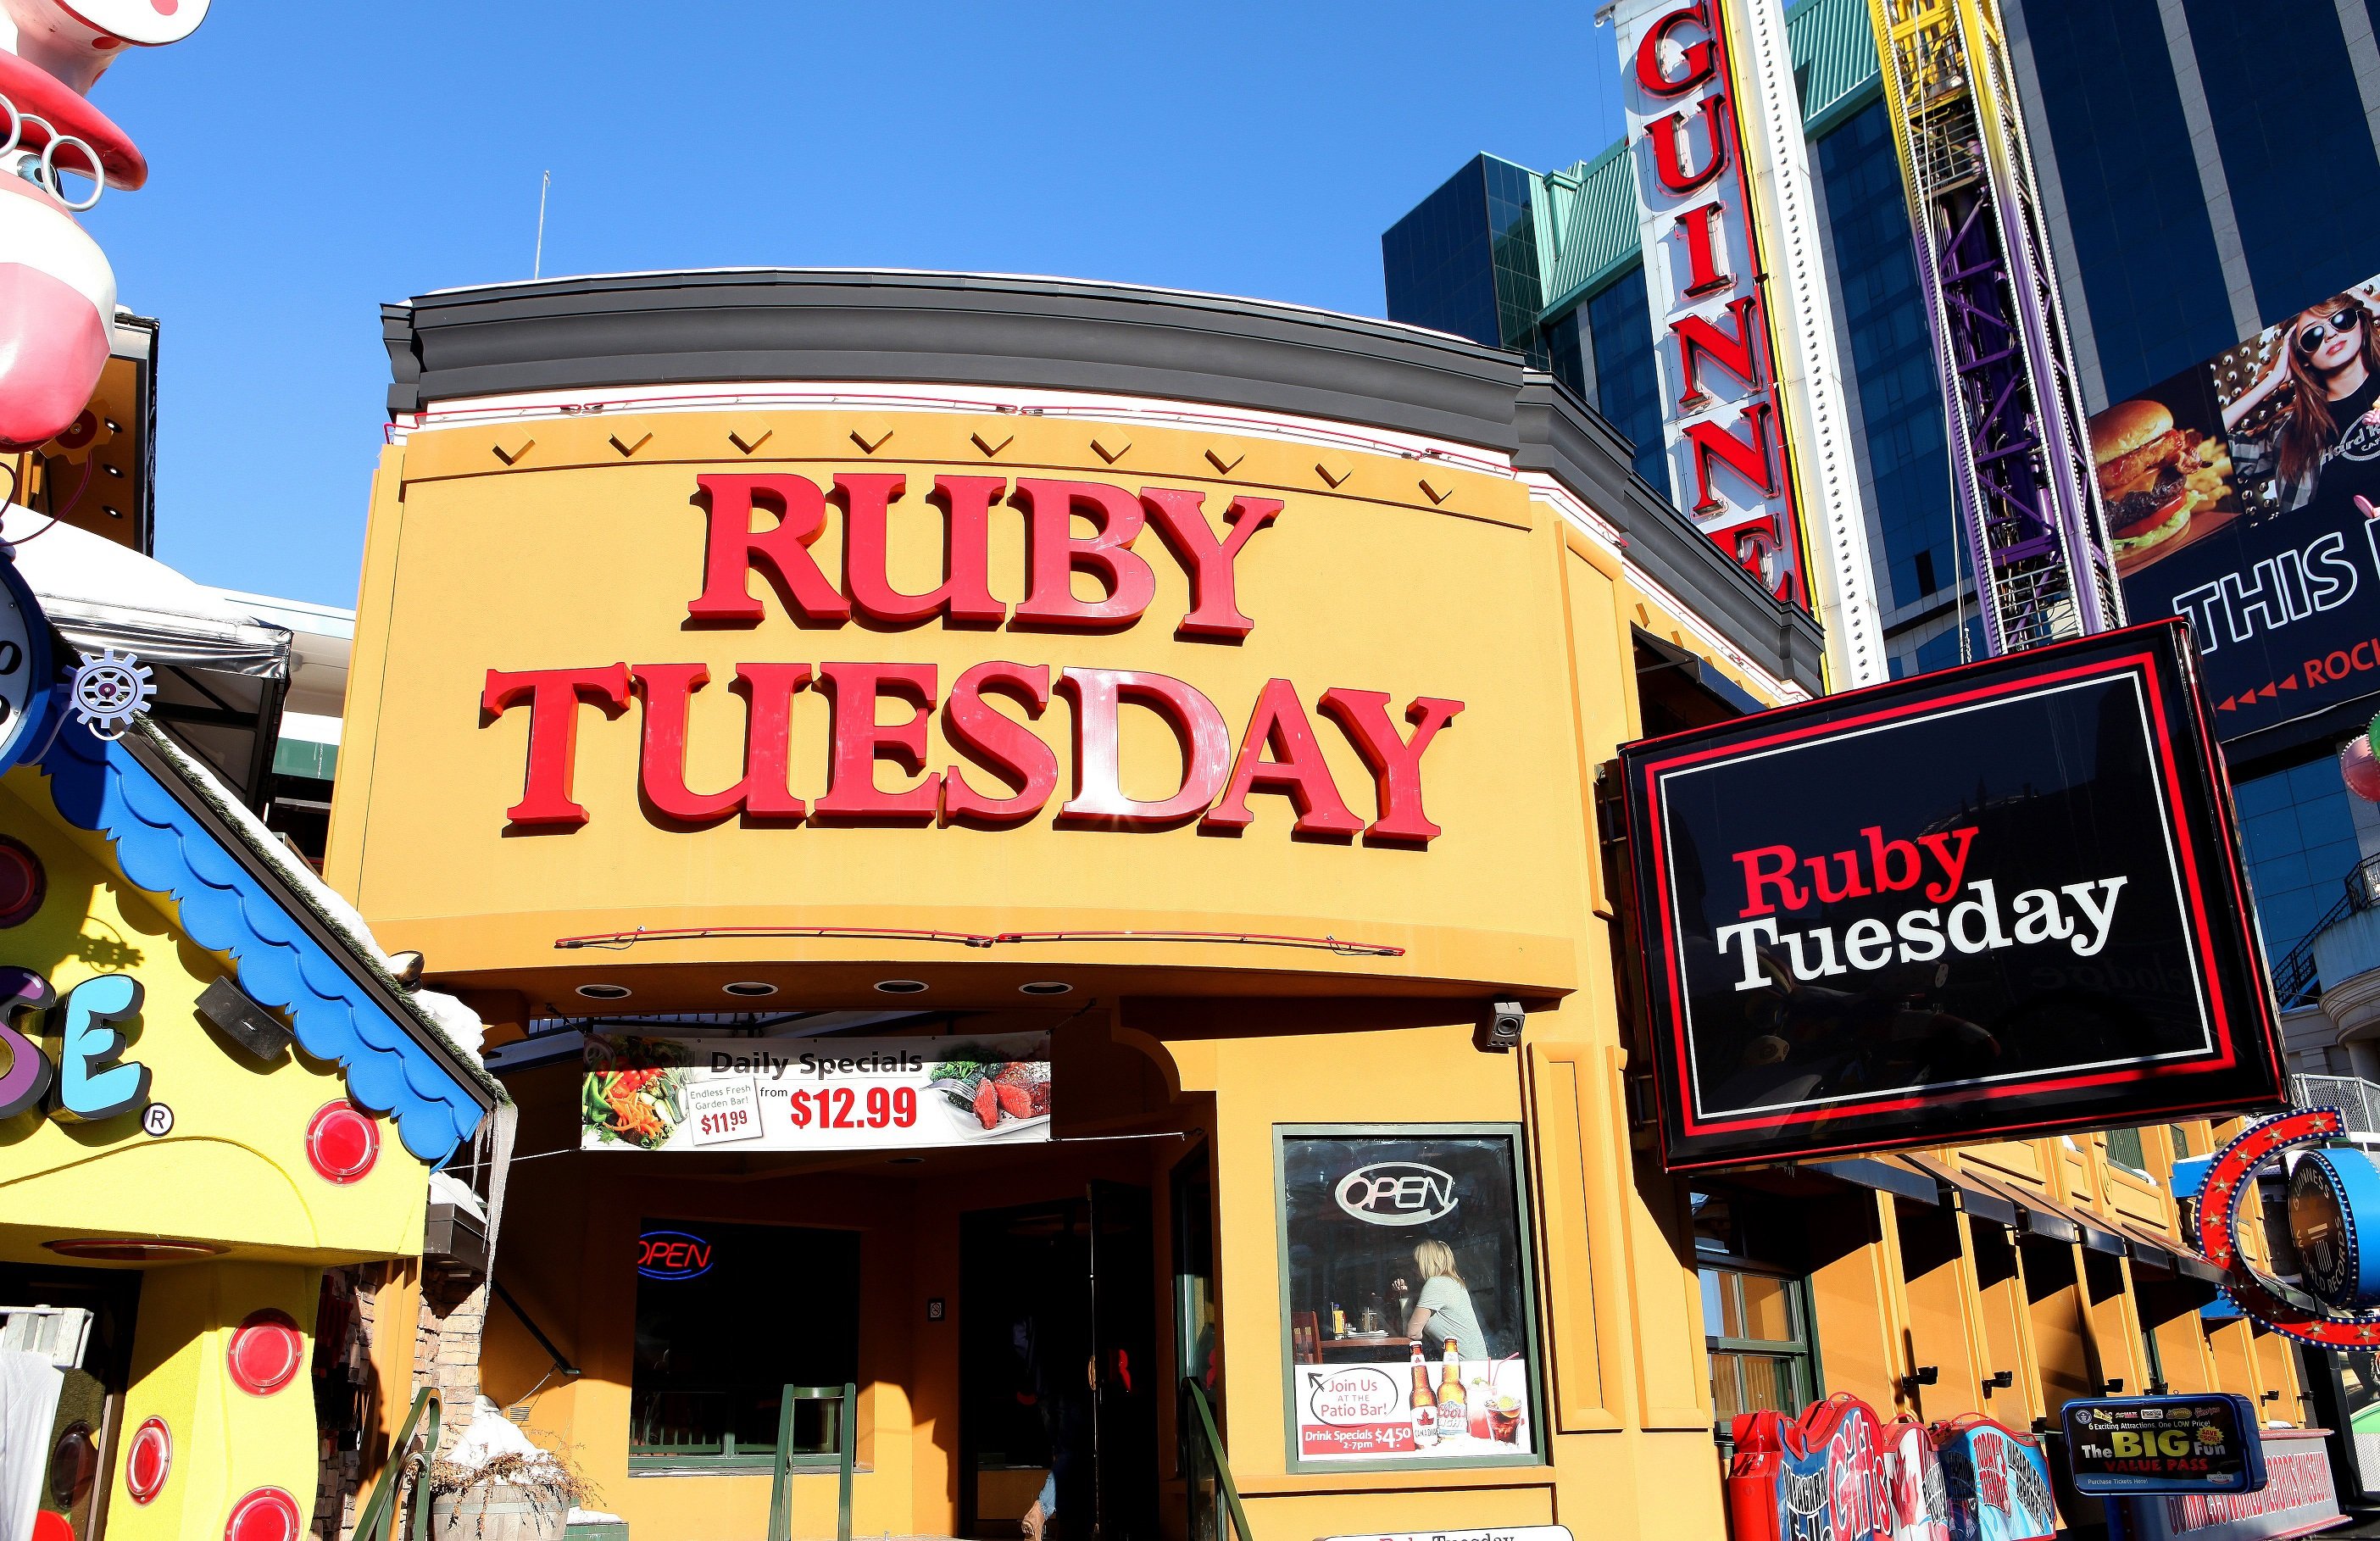 A Ruby Tuesday restaurant with a red sign